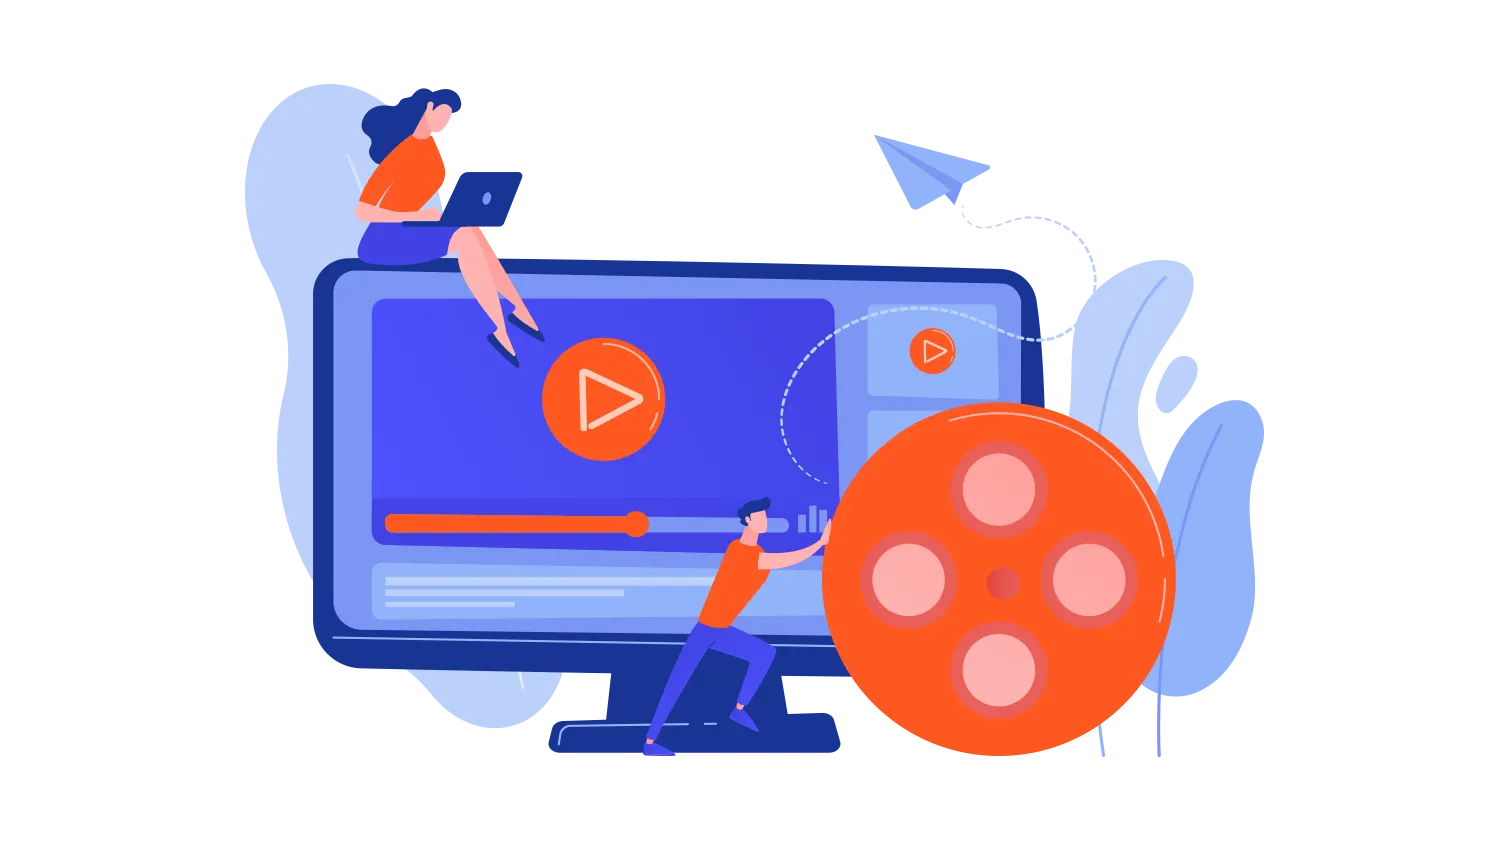 Video marketing services